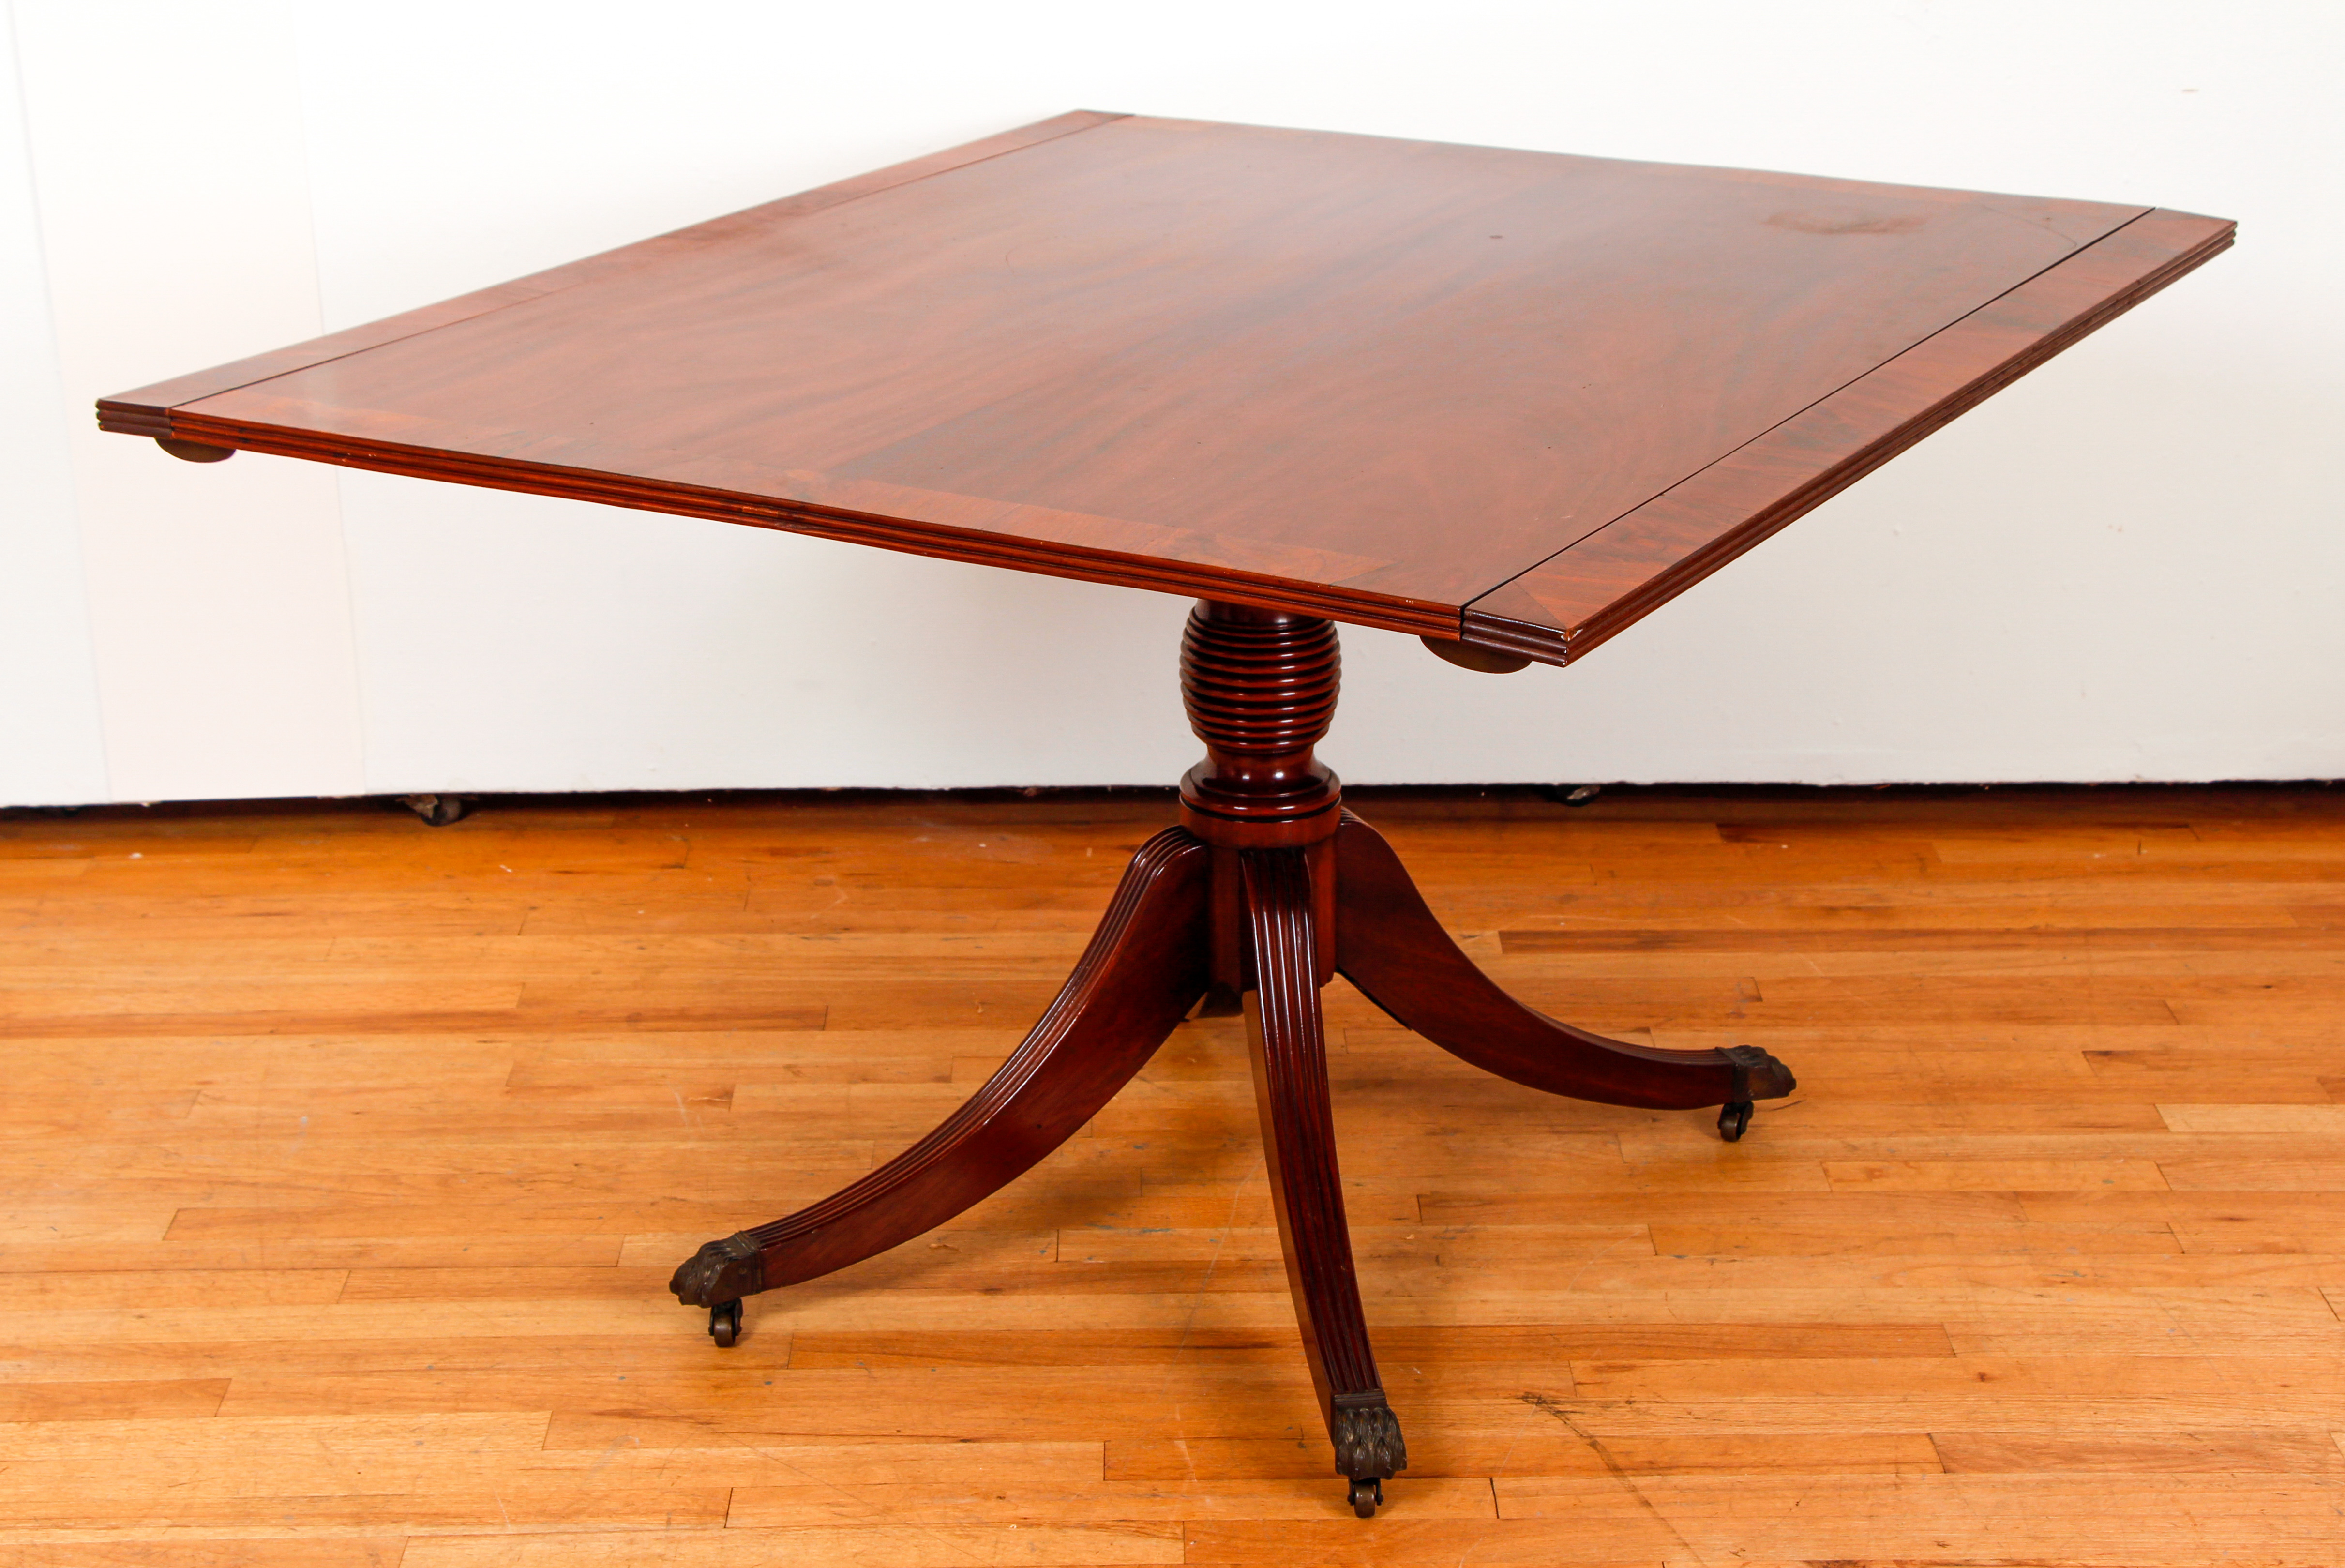 Duncan Phyfe Style triple pedestal dining table - Image 5 of 8